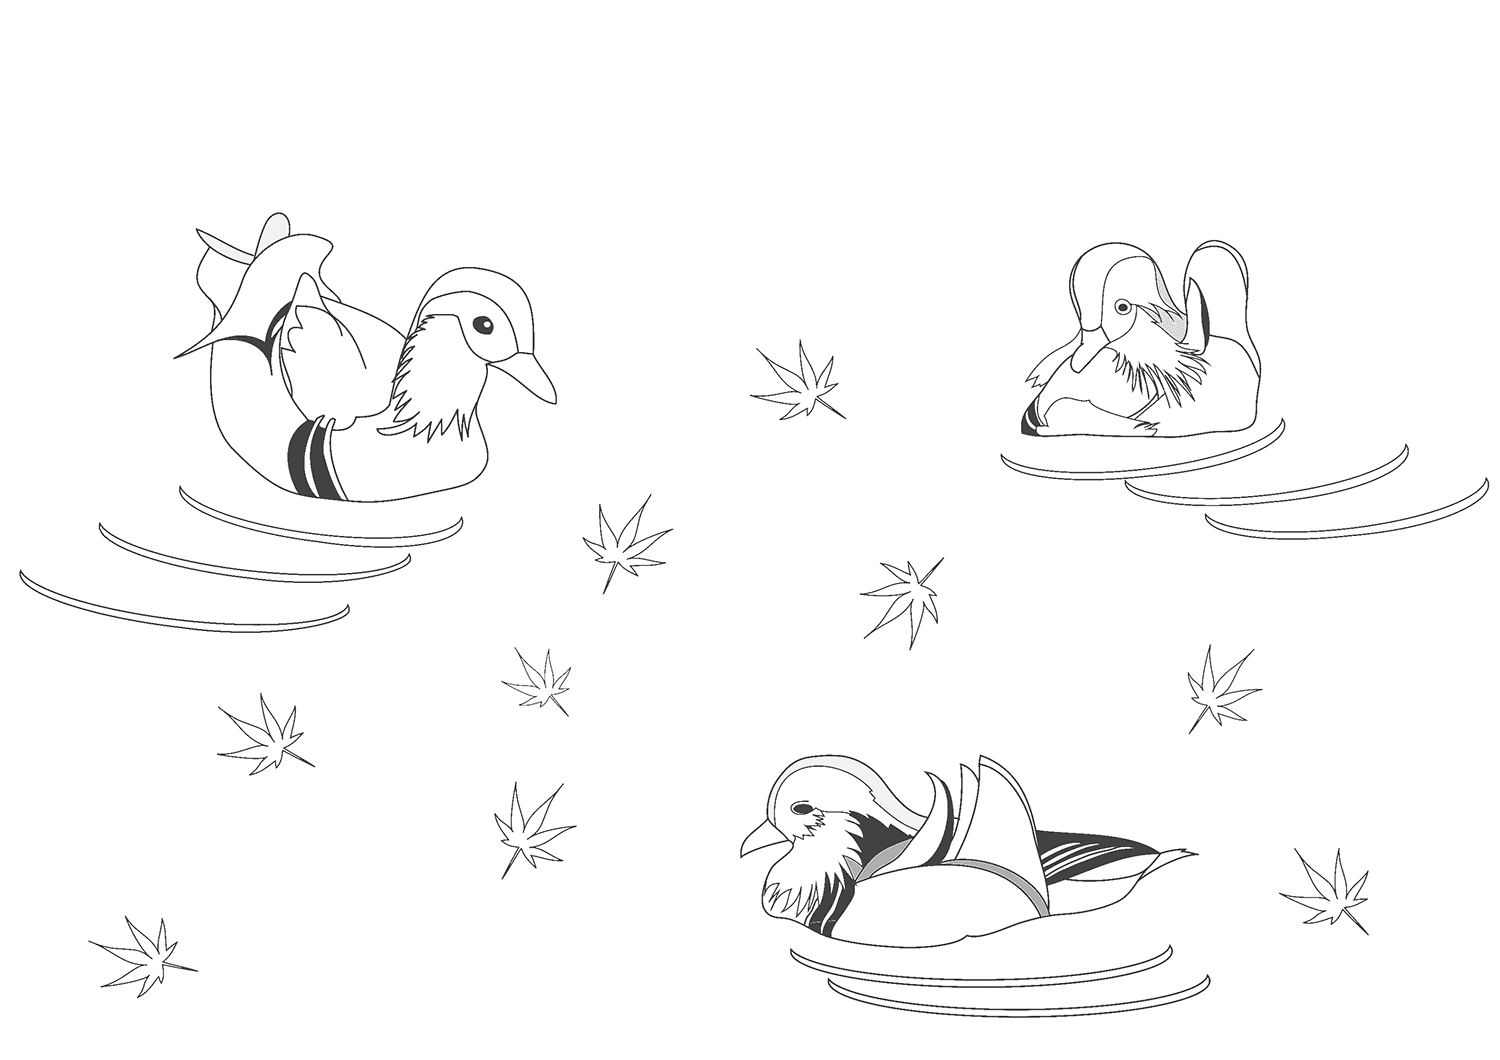 Male Mandarin ducks swimming in the maple leaves day Coloring Pages